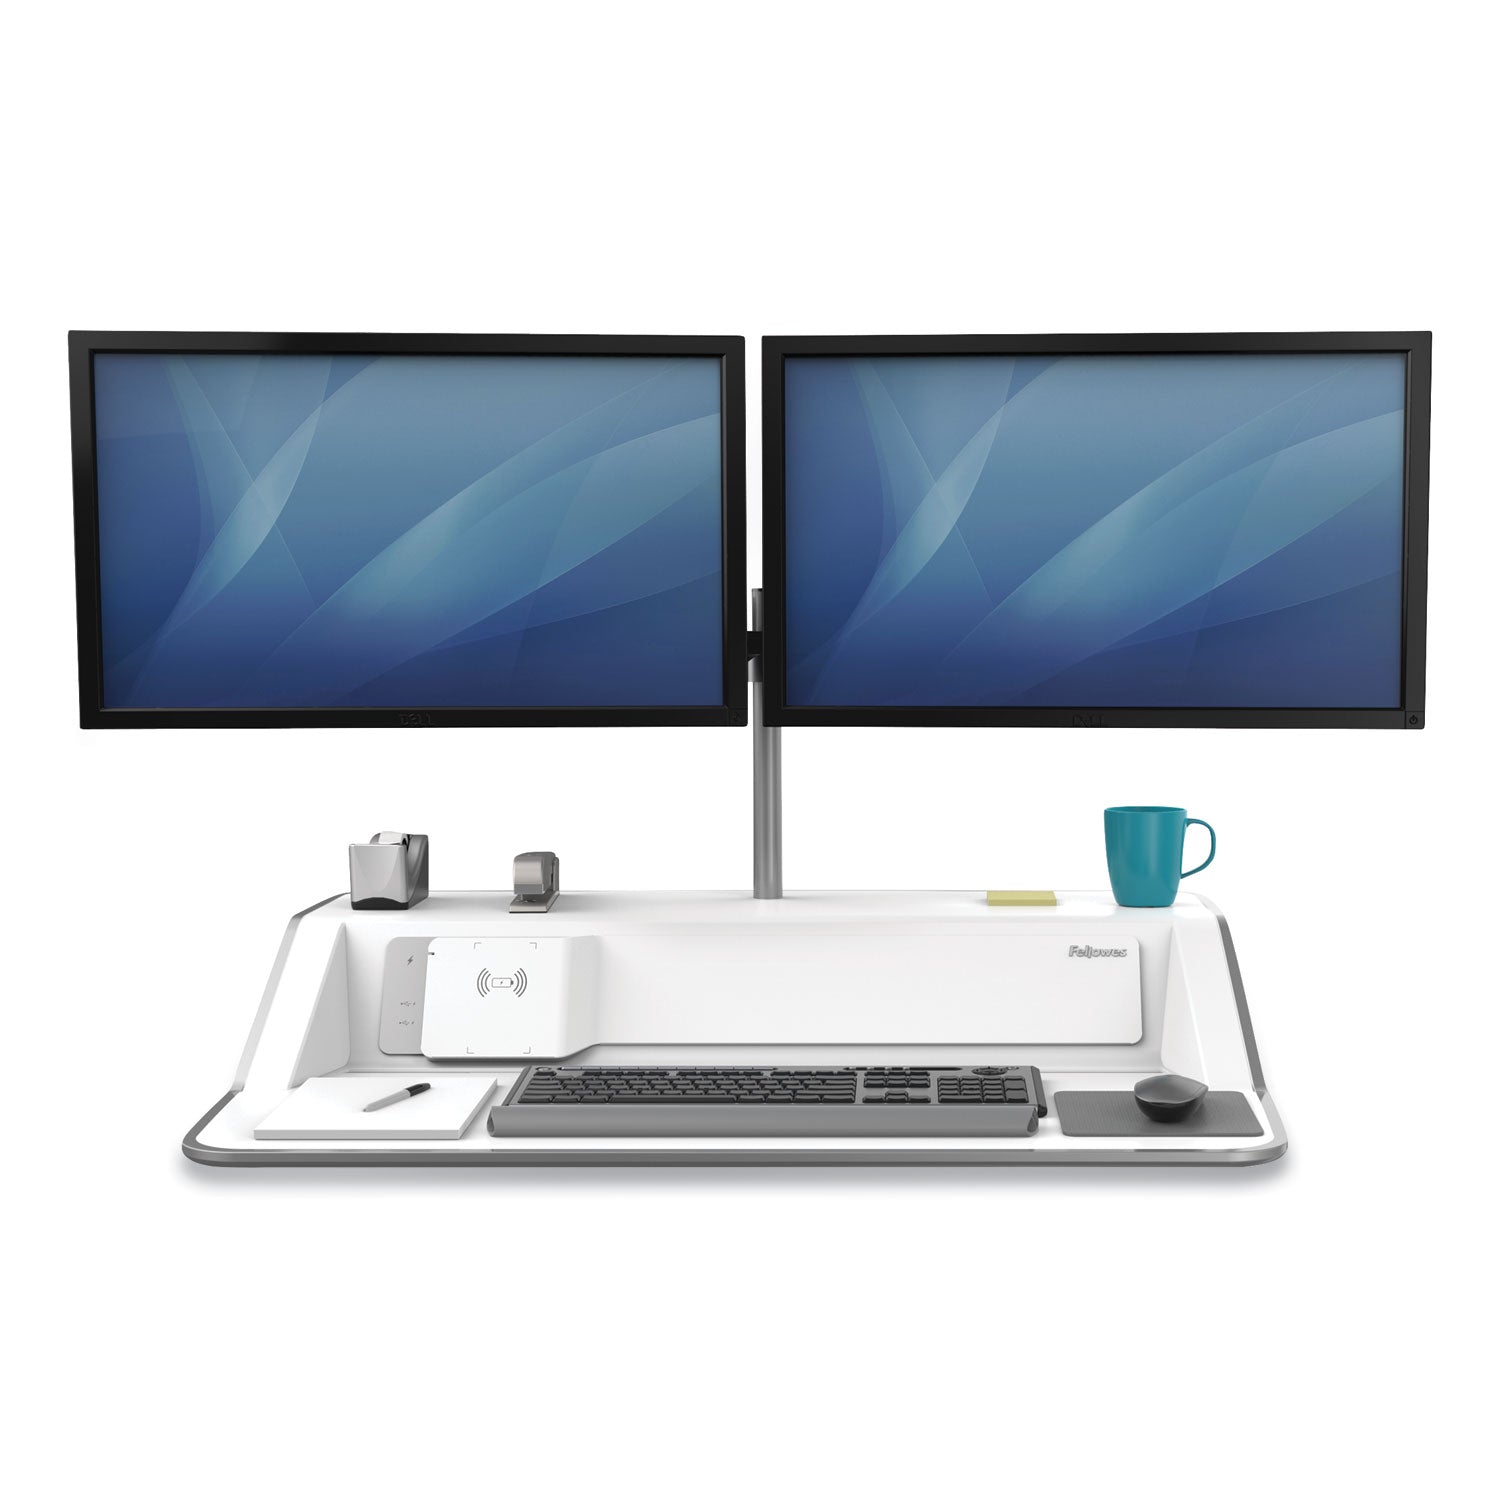 lotus-dx-sit-stand-workstation-3275-x-2425-x-55-to-225-white_fel8080201 - 2